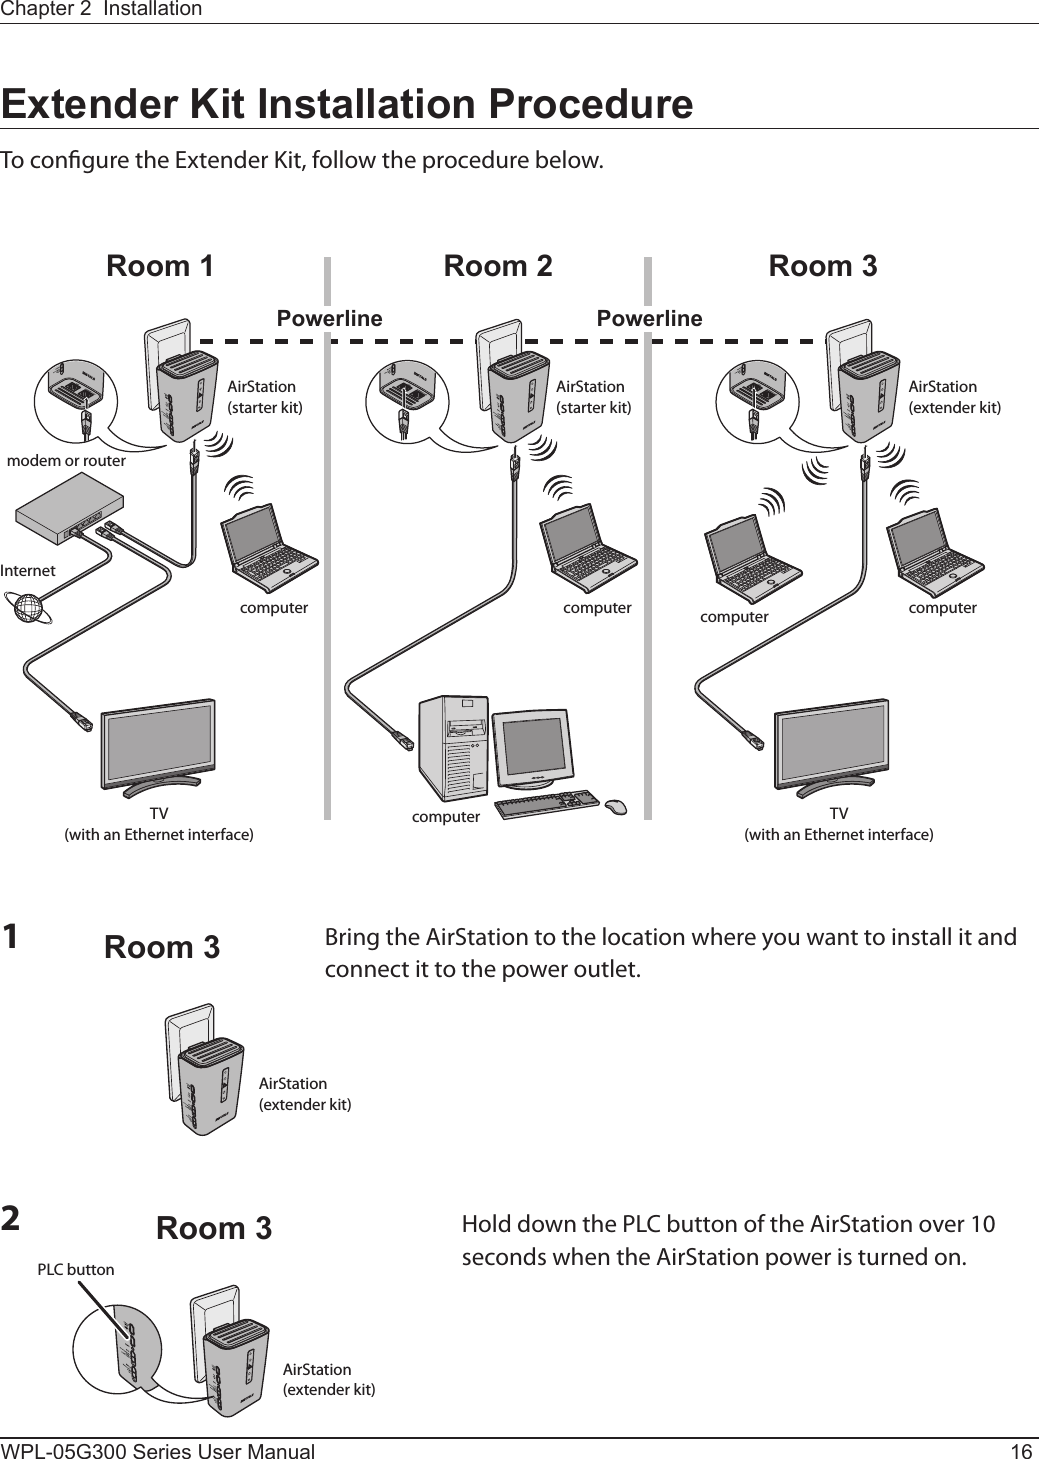 Room 3Room 1 Room 2 Room 3Powerline PowerlineRoom 3modem or routerInternetcomputer computercomputercomputercomputerAirStation(extender kit)AirStation(starter kit)AirStation(starter kit)TV(with an Ethernet interface)TV(with an Ethernet interface)AirStation(extender kit)PLC buttonAirStation(extender kit)WPL-05G300 Series User Manual 16Chapter 2  InstallationExtender Kit Installation ProcedureTo congure the Extender Kit, follow the procedure below.1Bring the AirStation to the location where you want to install it and connect it to the power outlet.2Hold down the PLC button of the AirStation over 10 seconds when the AirStation power is turned on.